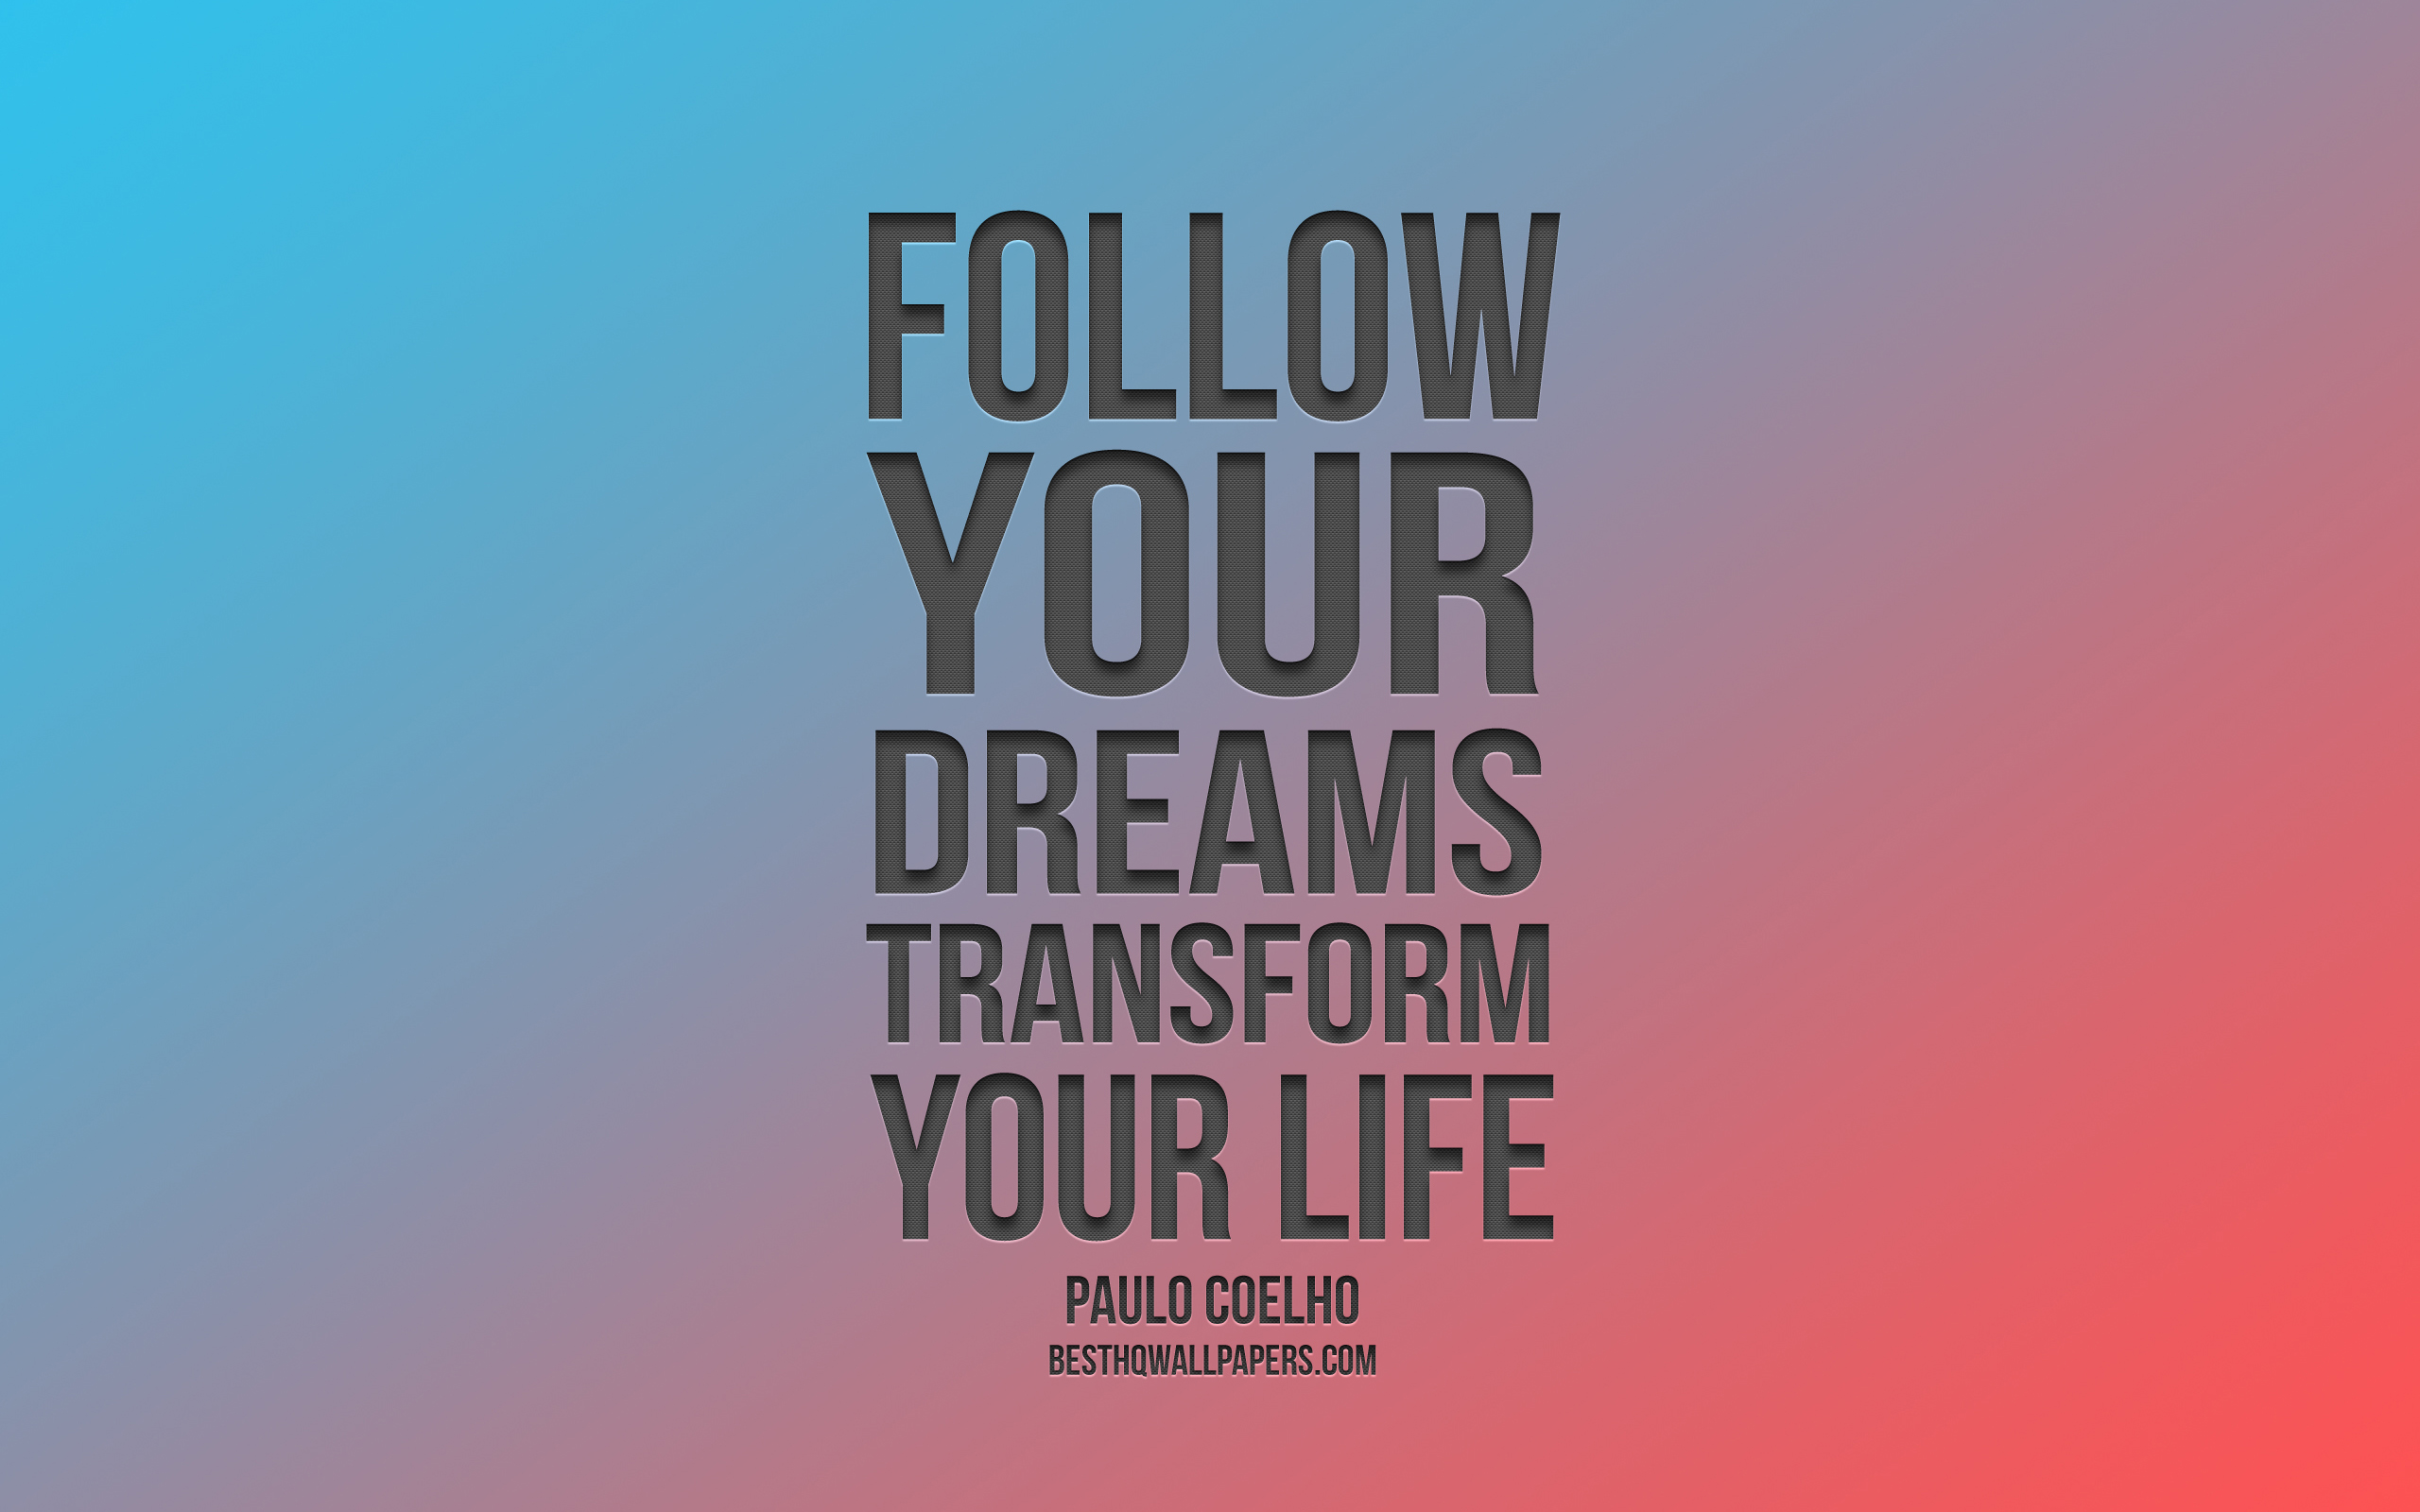 Follow Your Dreams Transform Your Life, Paulo Coelho - Poster , HD Wallpaper & Backgrounds